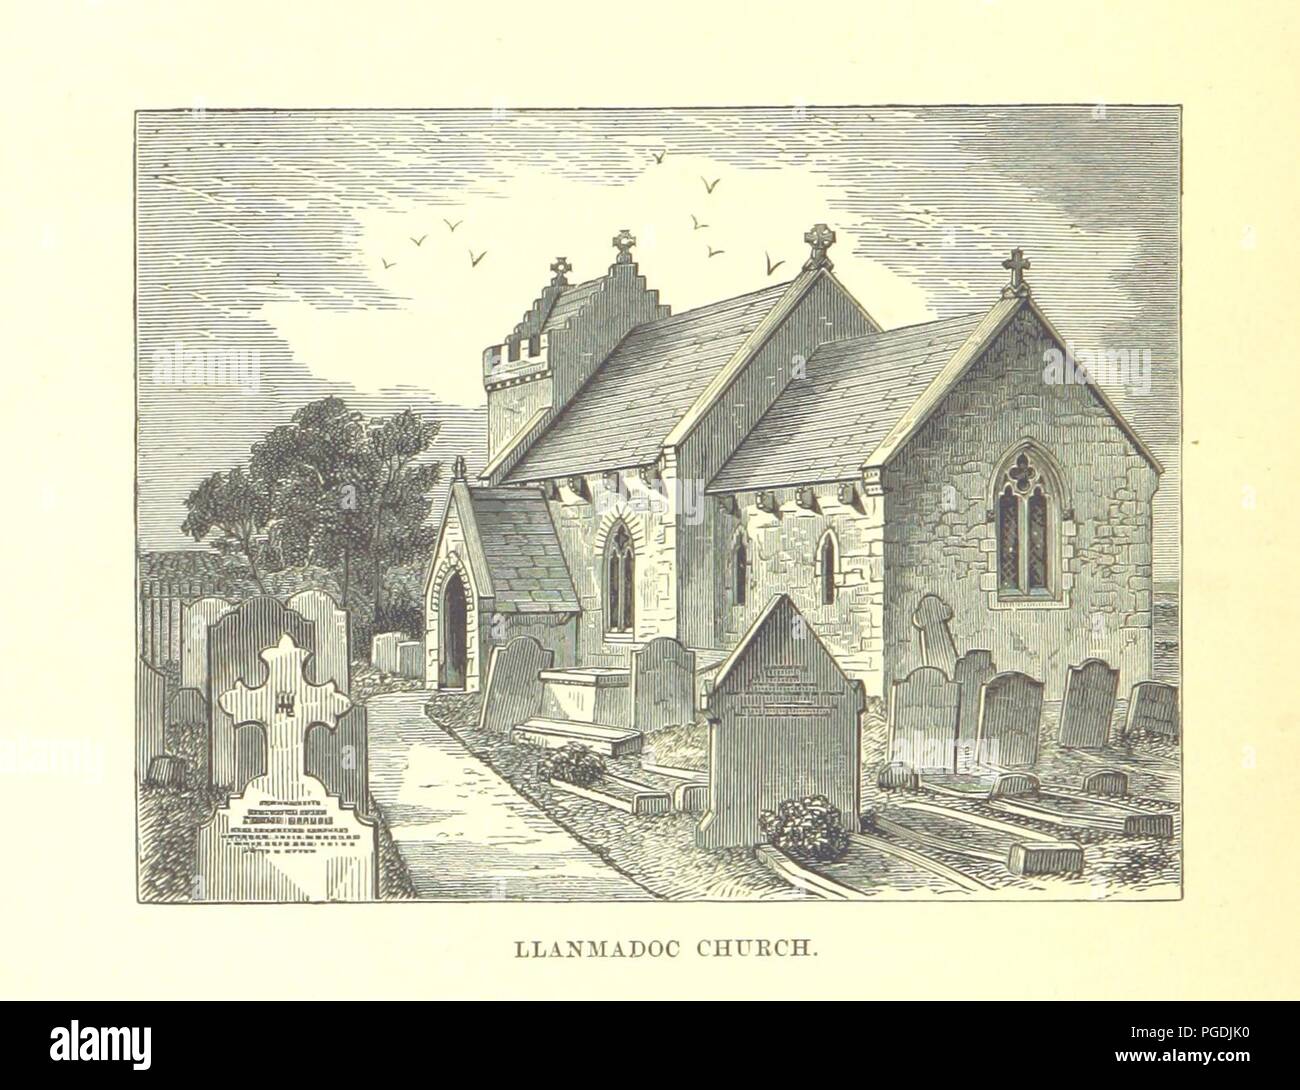 Image  from page 140 of 'A History of West Gower, Glamorganshire. (pt. 2. Historical Notices of the Parishes of Llanmadoc and Cheriton, etc.-pt. 3. Historical Notices of the Parishes of Llangenydd and Rhosili, etc.-pt. 4. H0013. Stock Photo